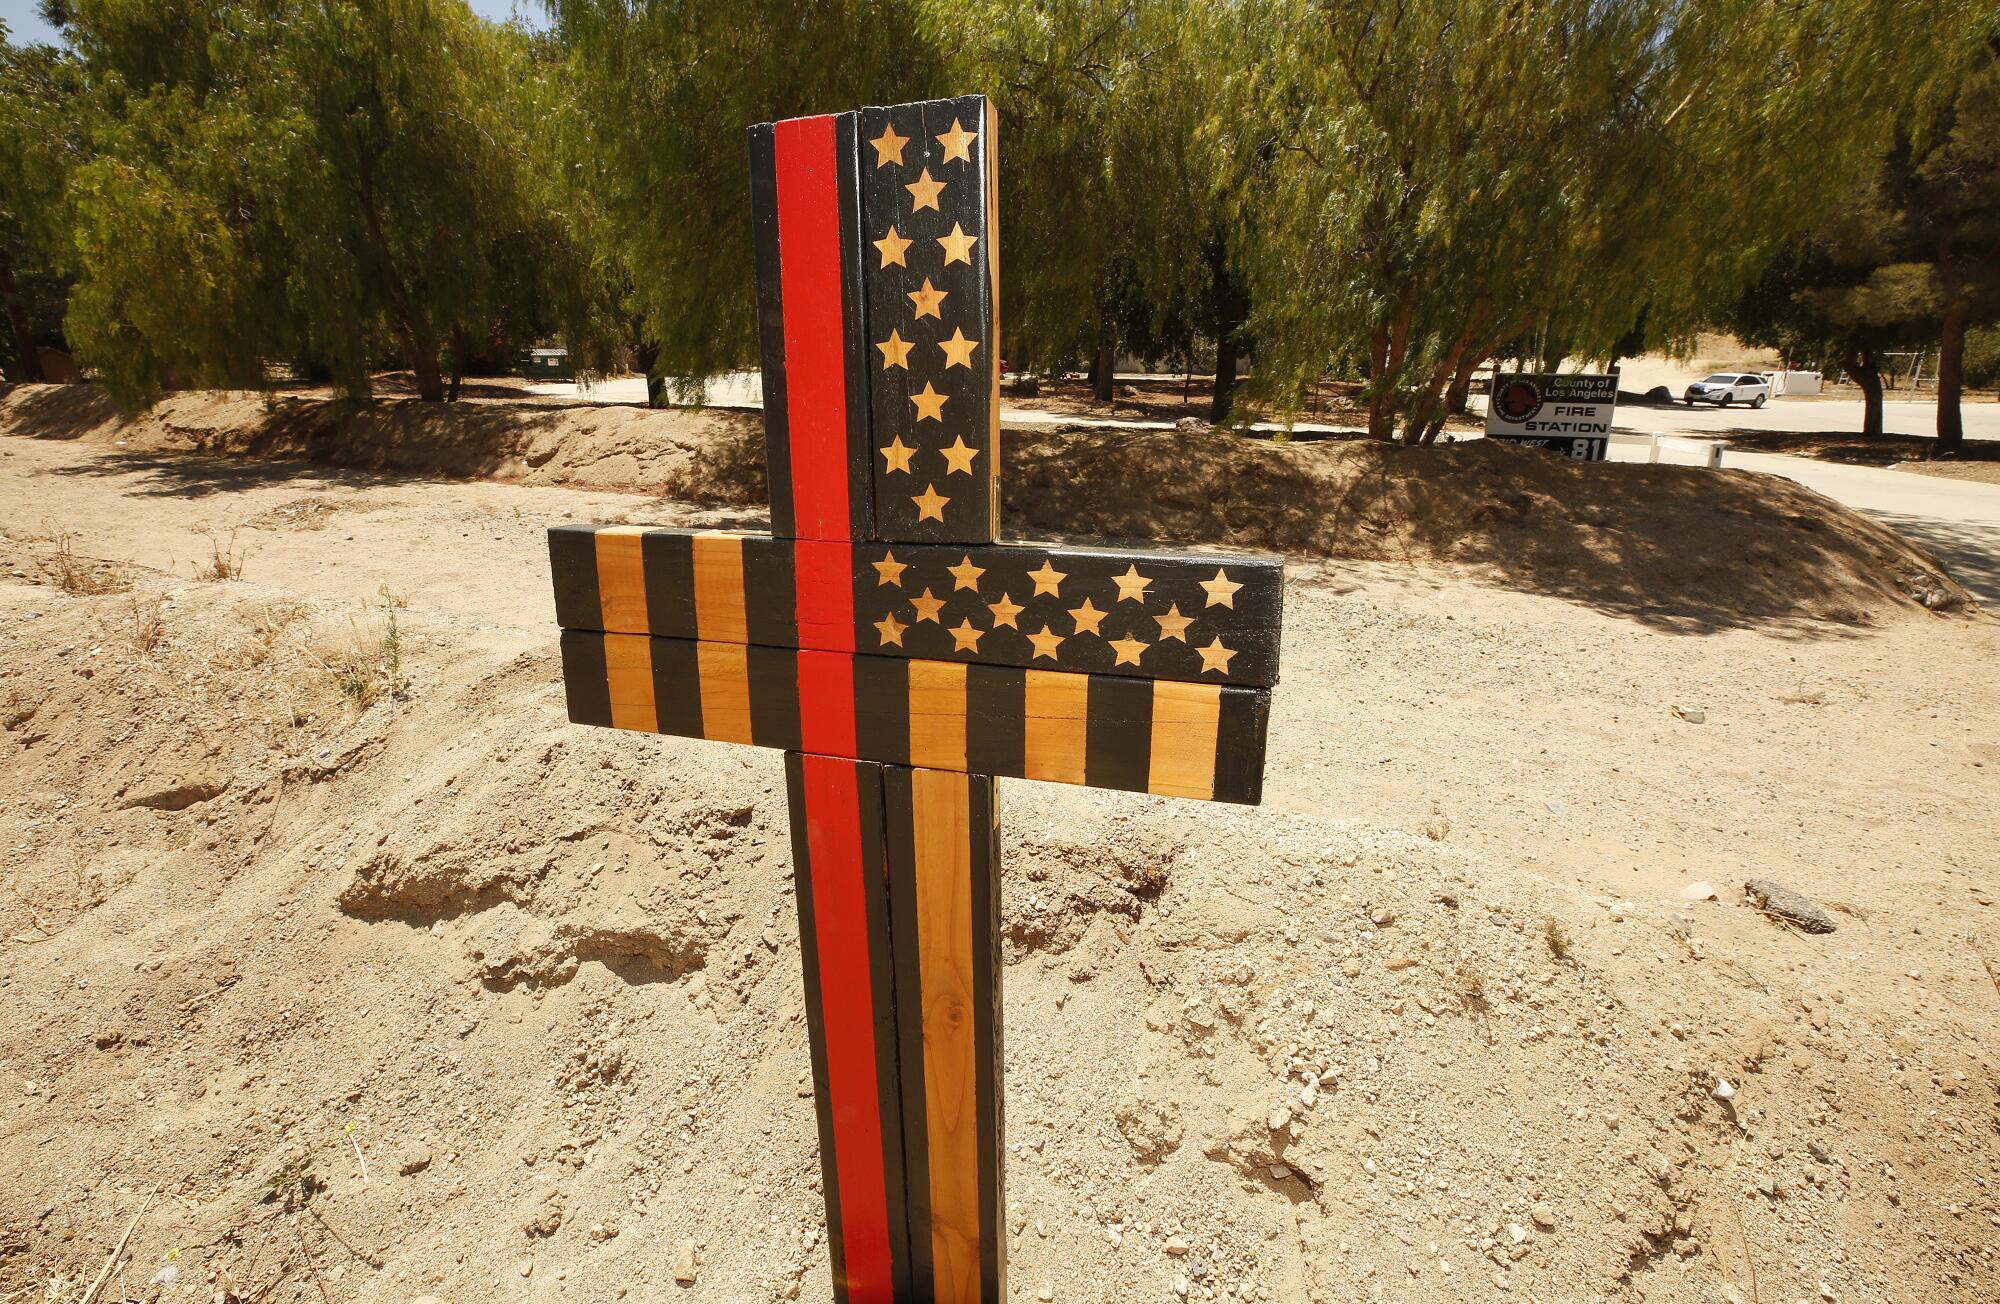 A memorial cross with American flag symbols erected outside Fire Station 81 in Agua Dulce in June 2021